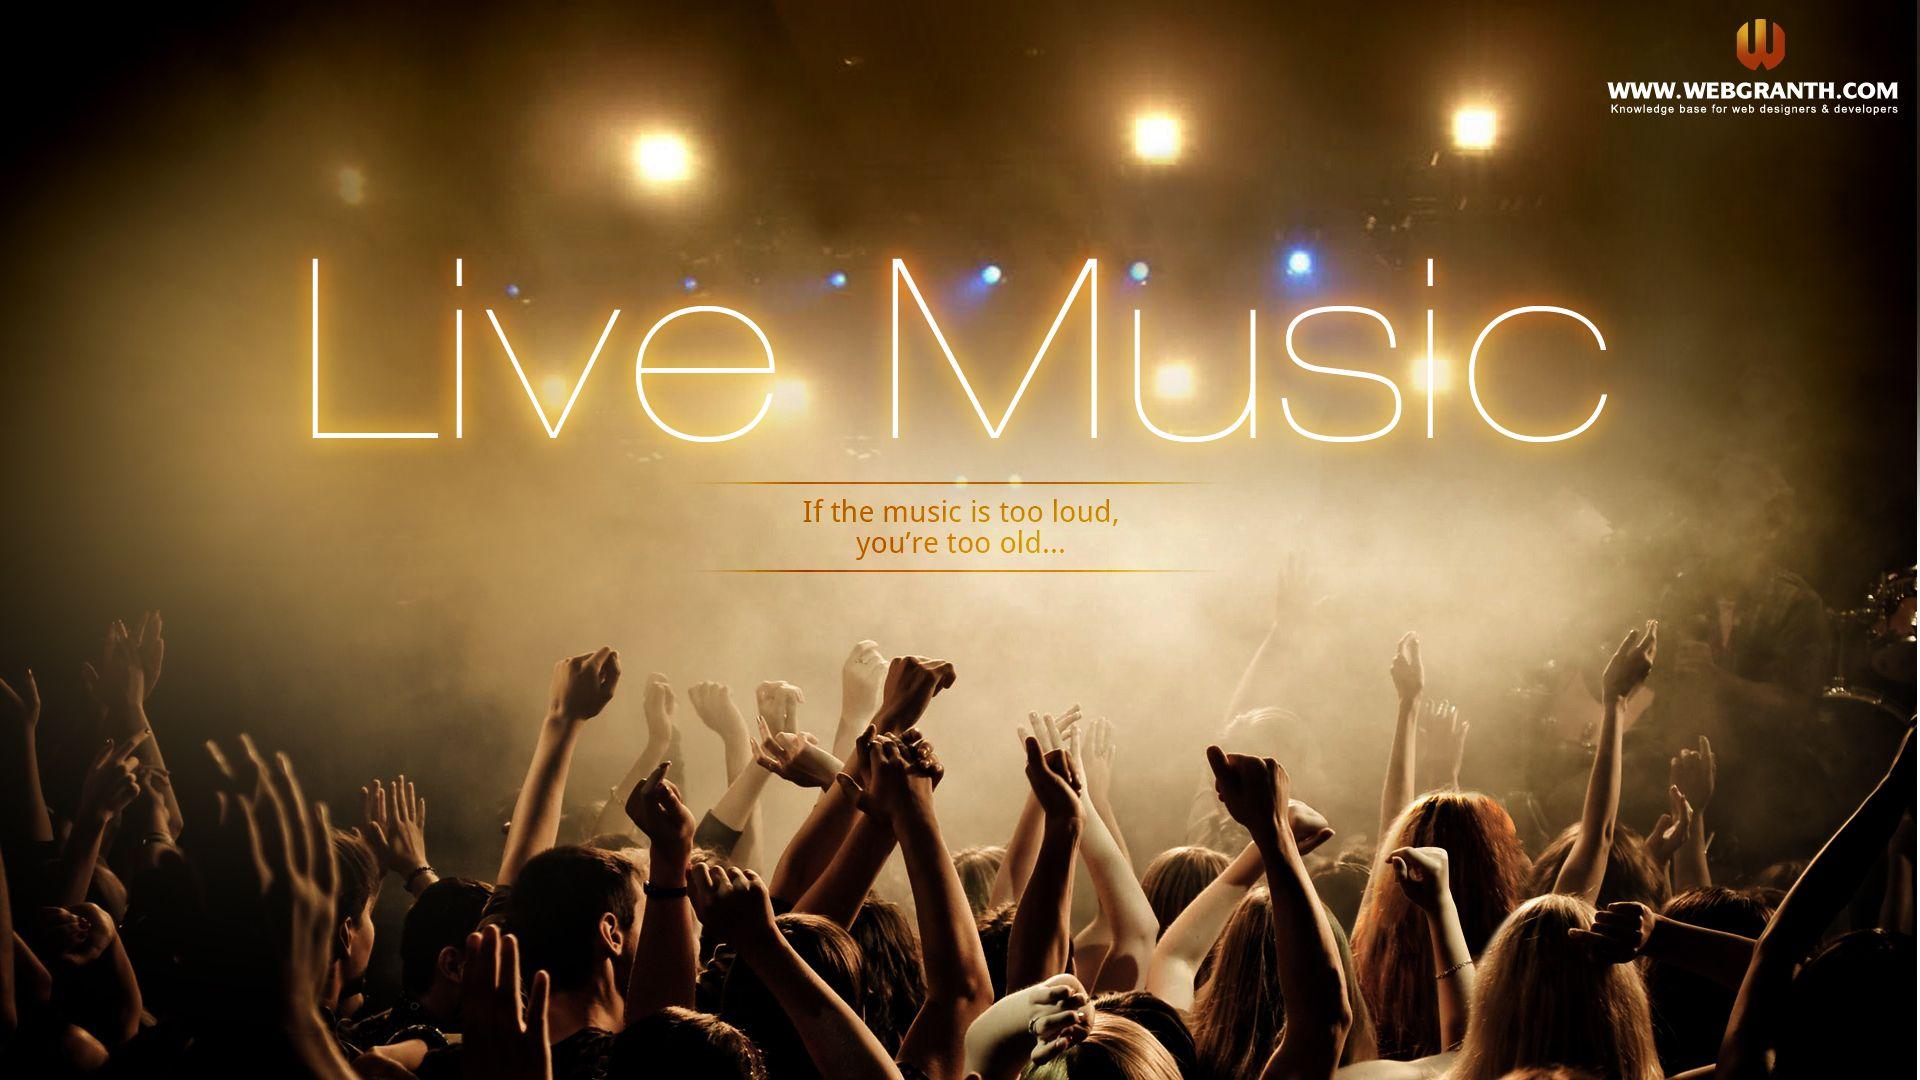  Live Music Wallpapers Wallpaper Cave